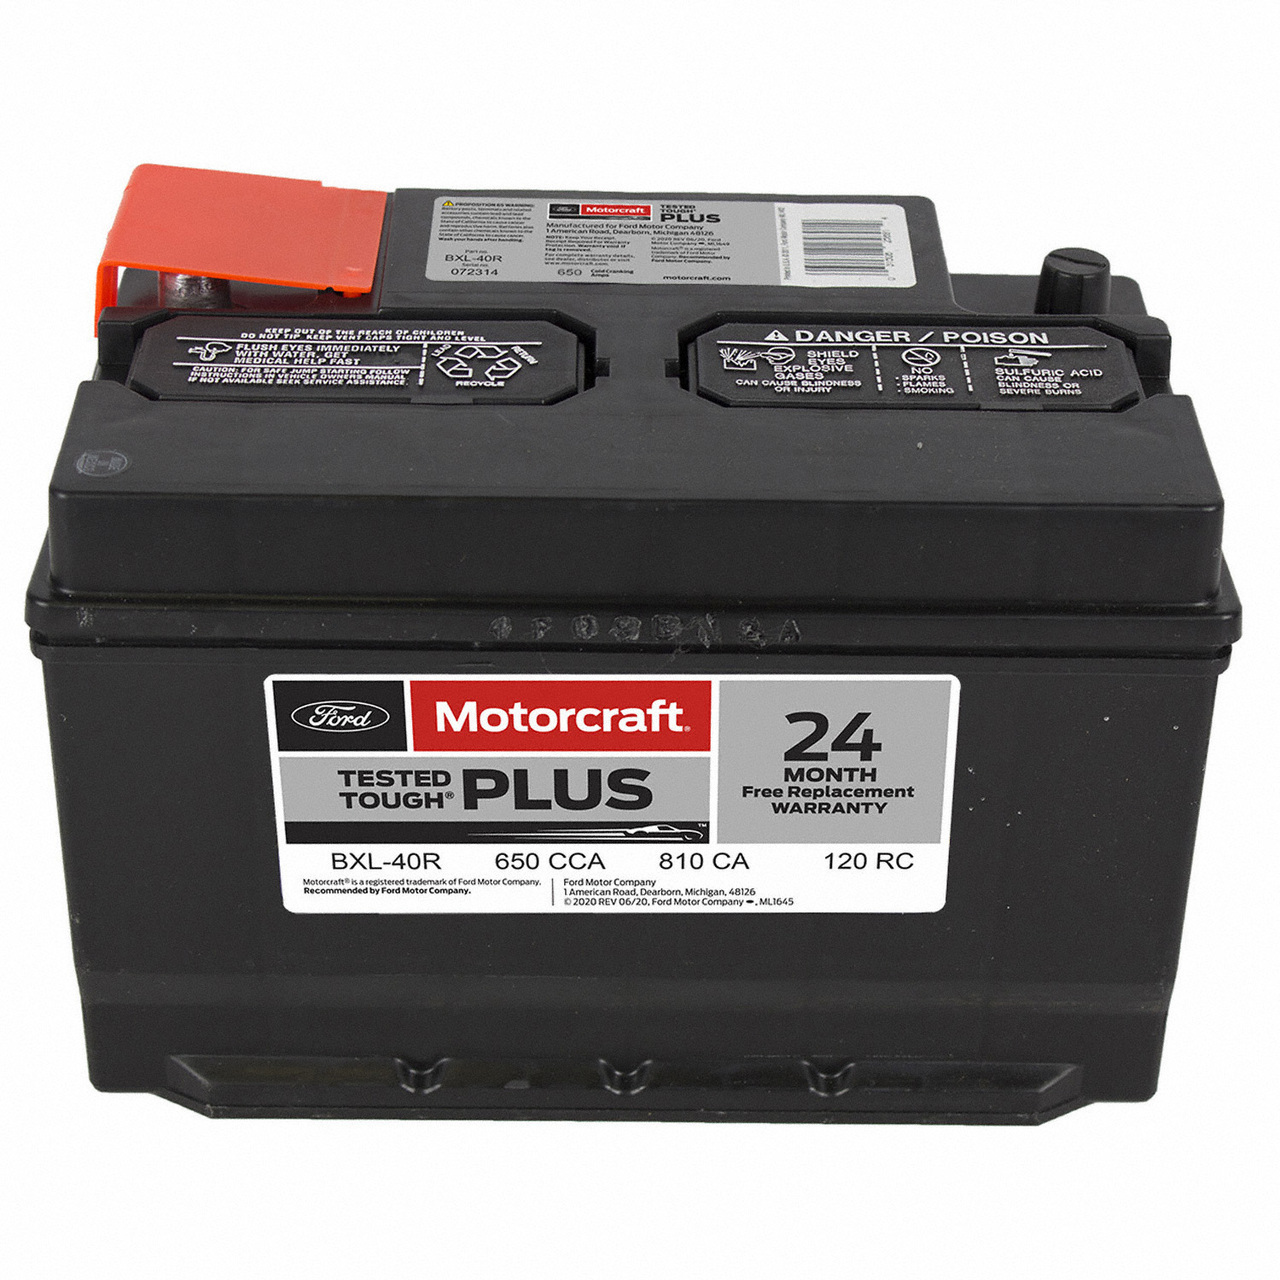 Ford motorcraft battery bxt-96r #2